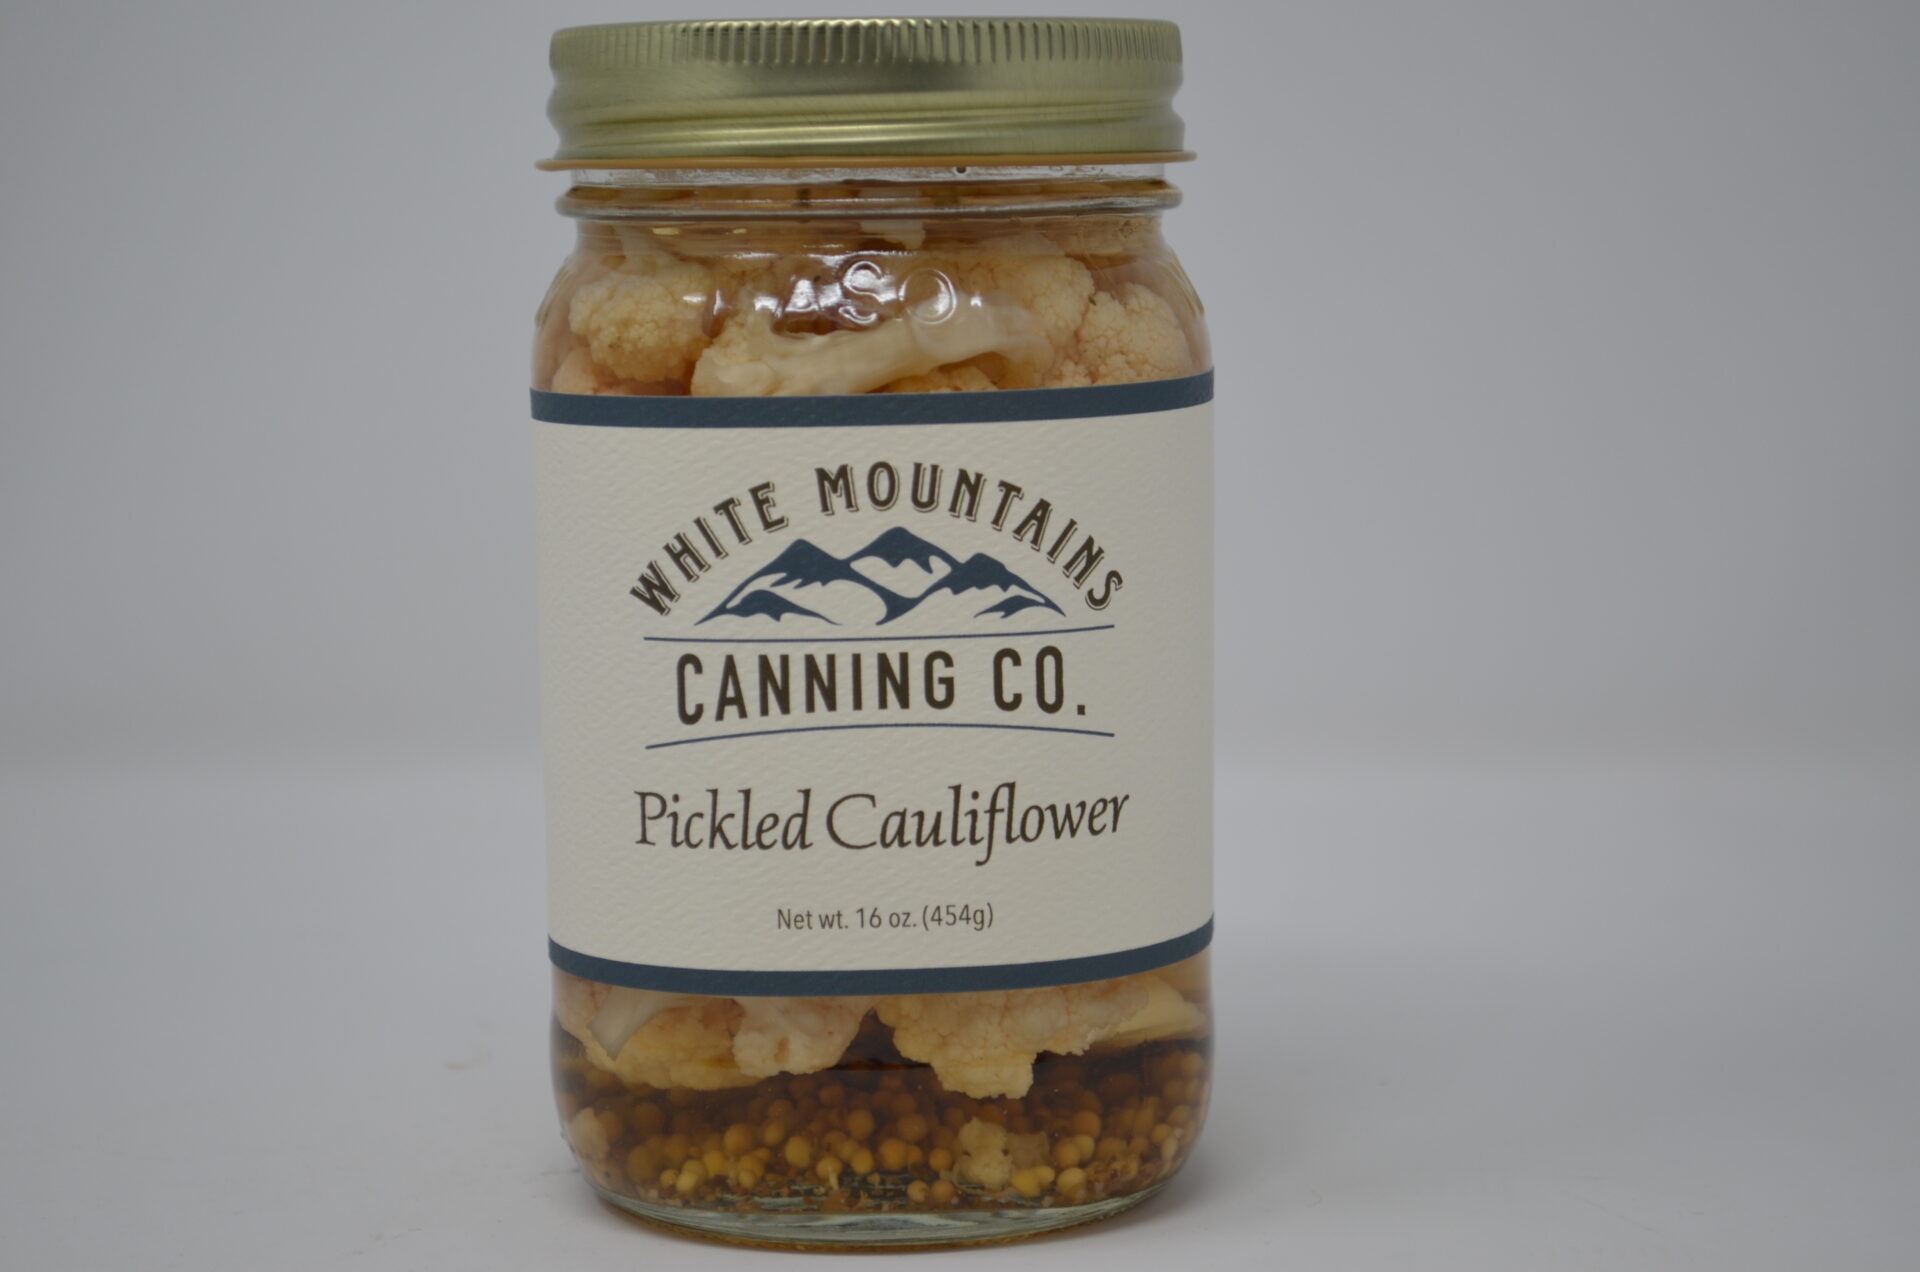 Pickled Cauliflower from white mountains